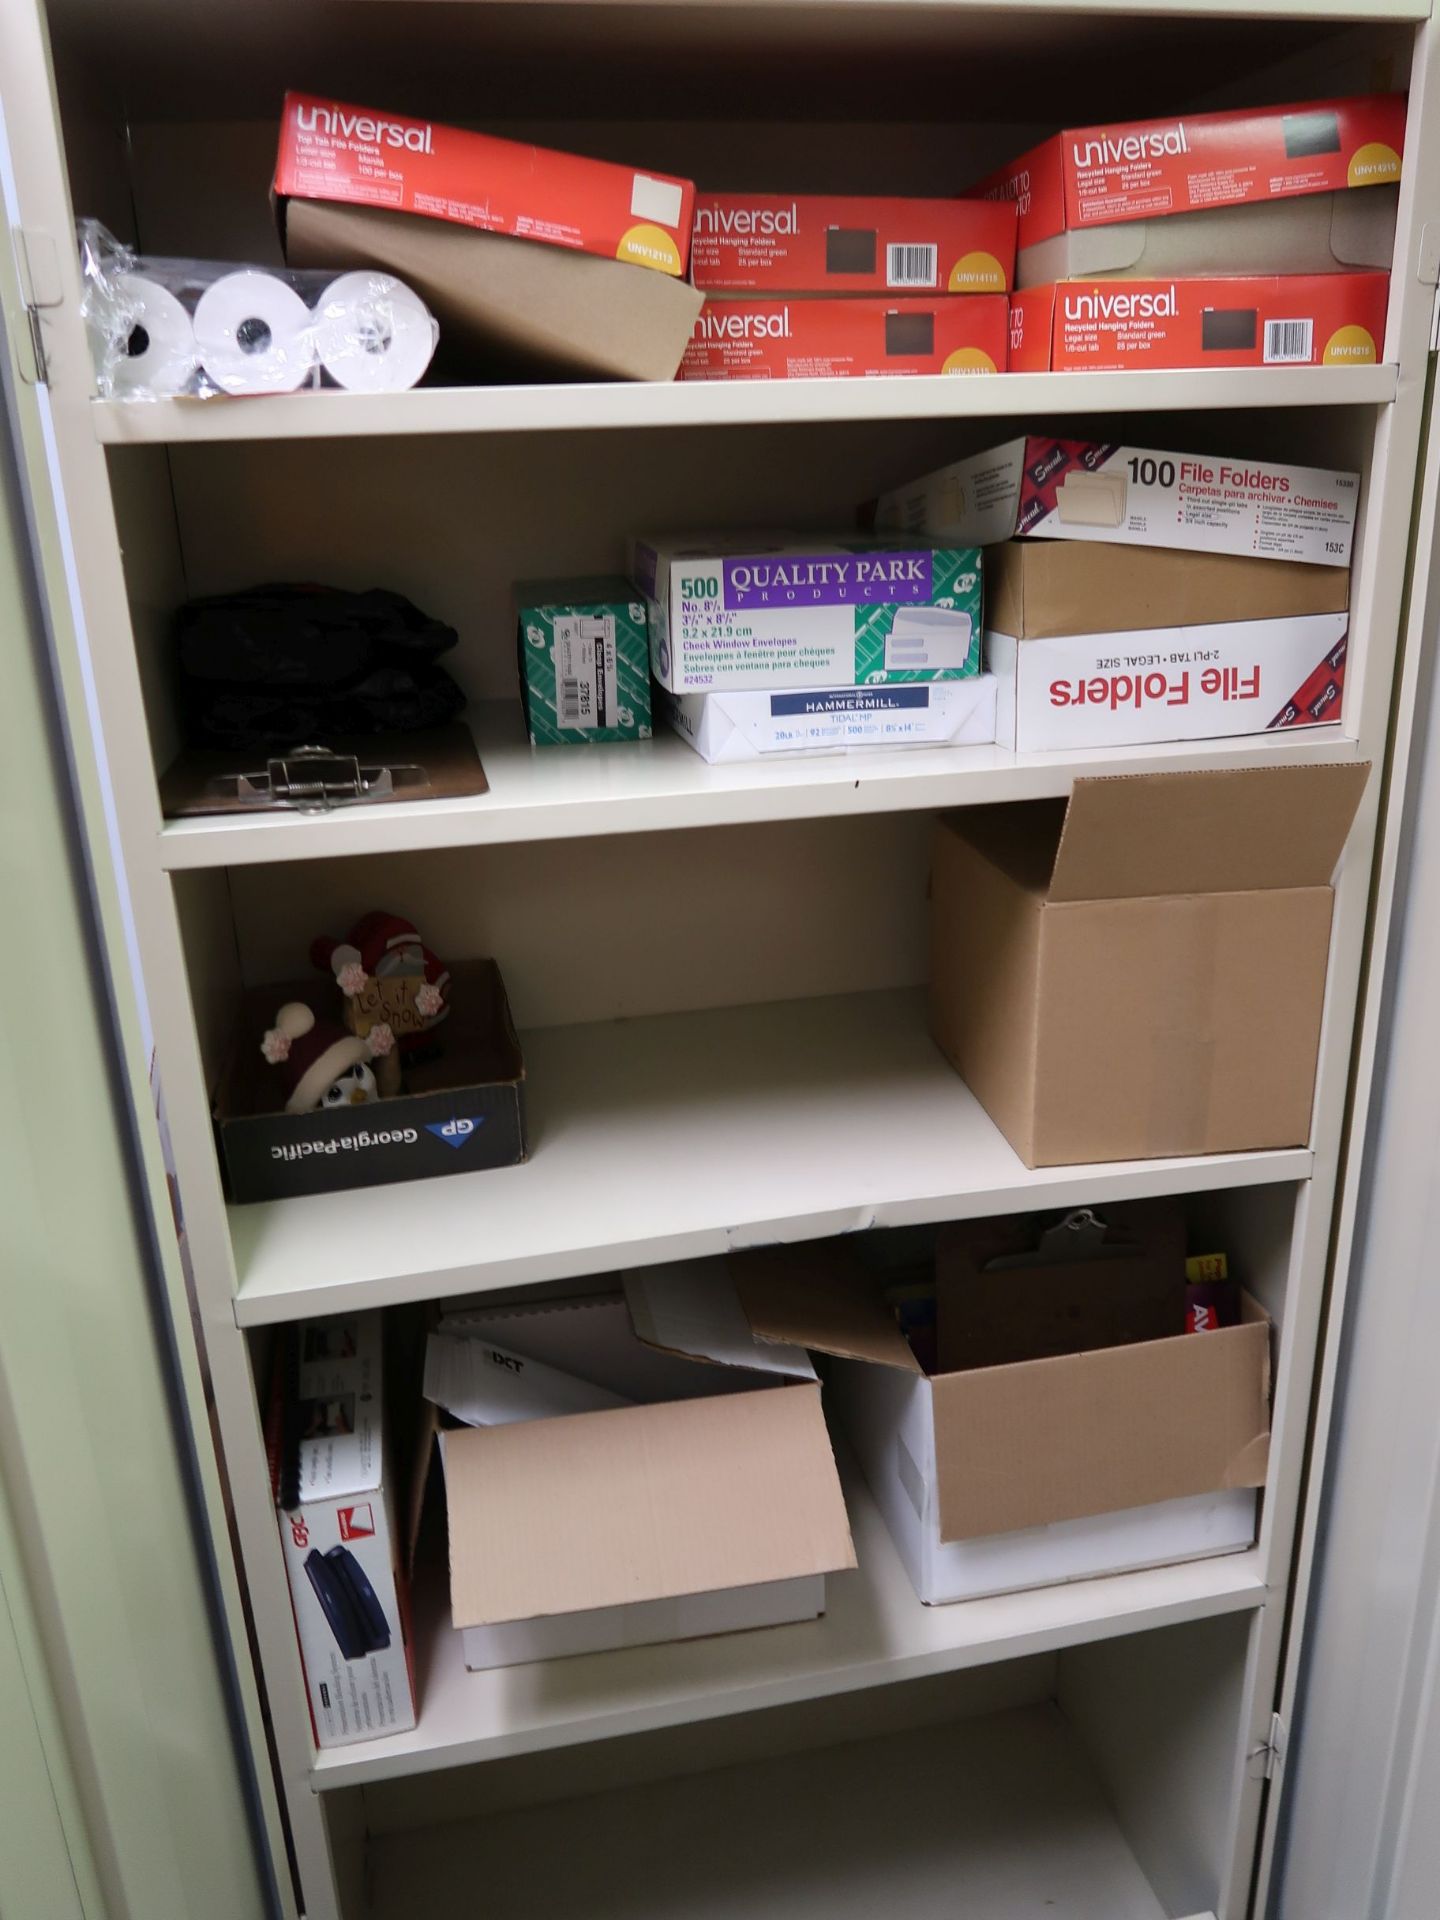 OFFICE SUPPLIES WITH STORAGE CABINETS AND SHELVING